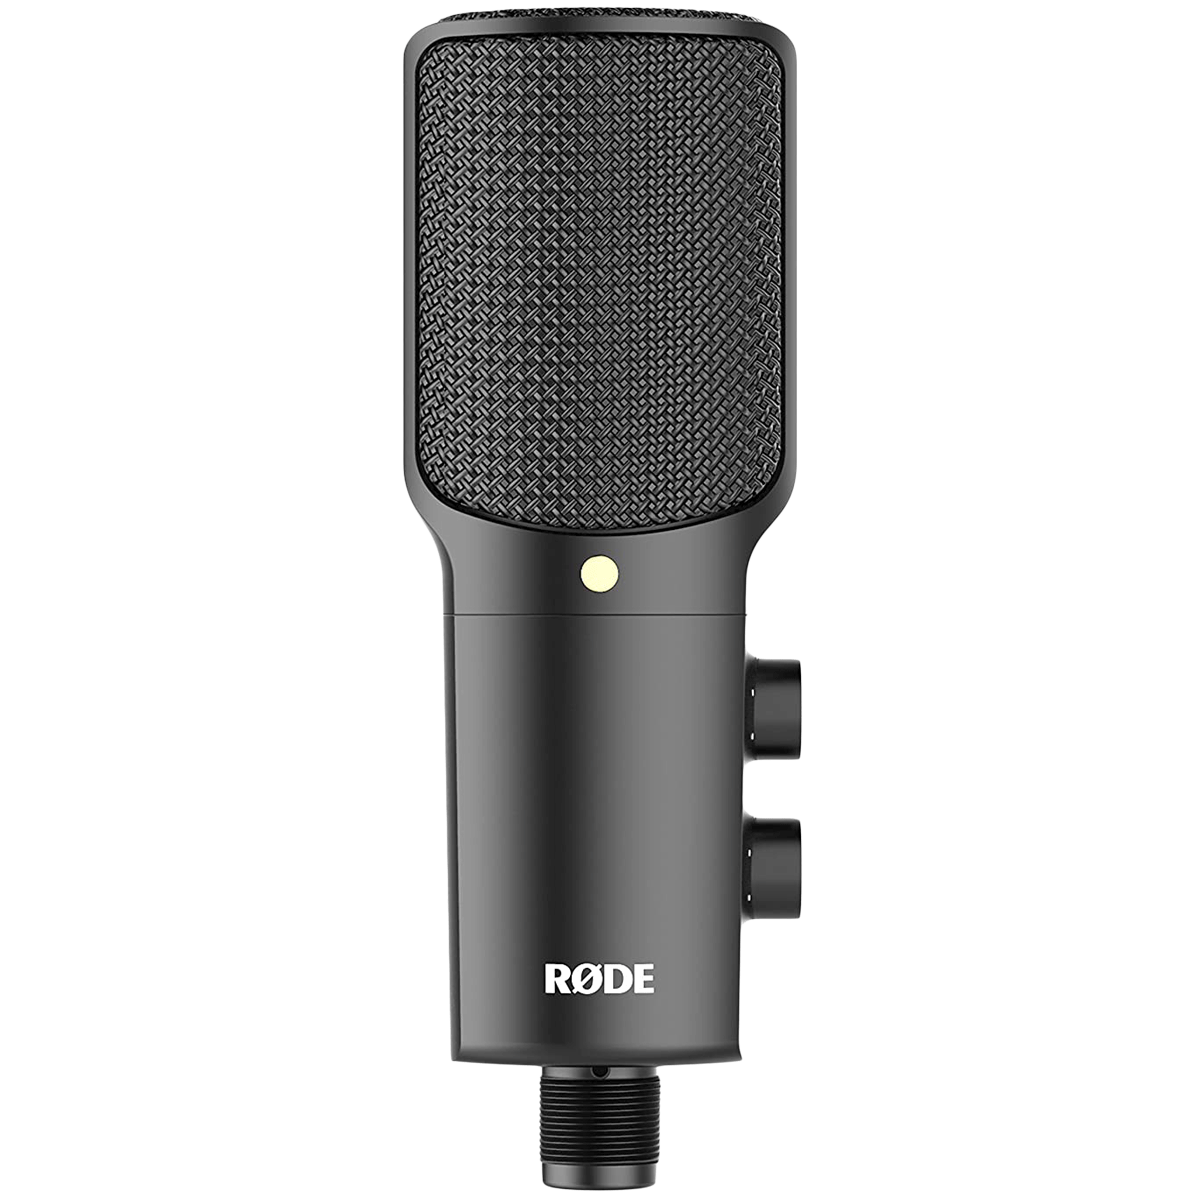 Rode NT Hanging Wired Condenser Microphone (Cardioid Pickup Pattern, NT-USB, Black)